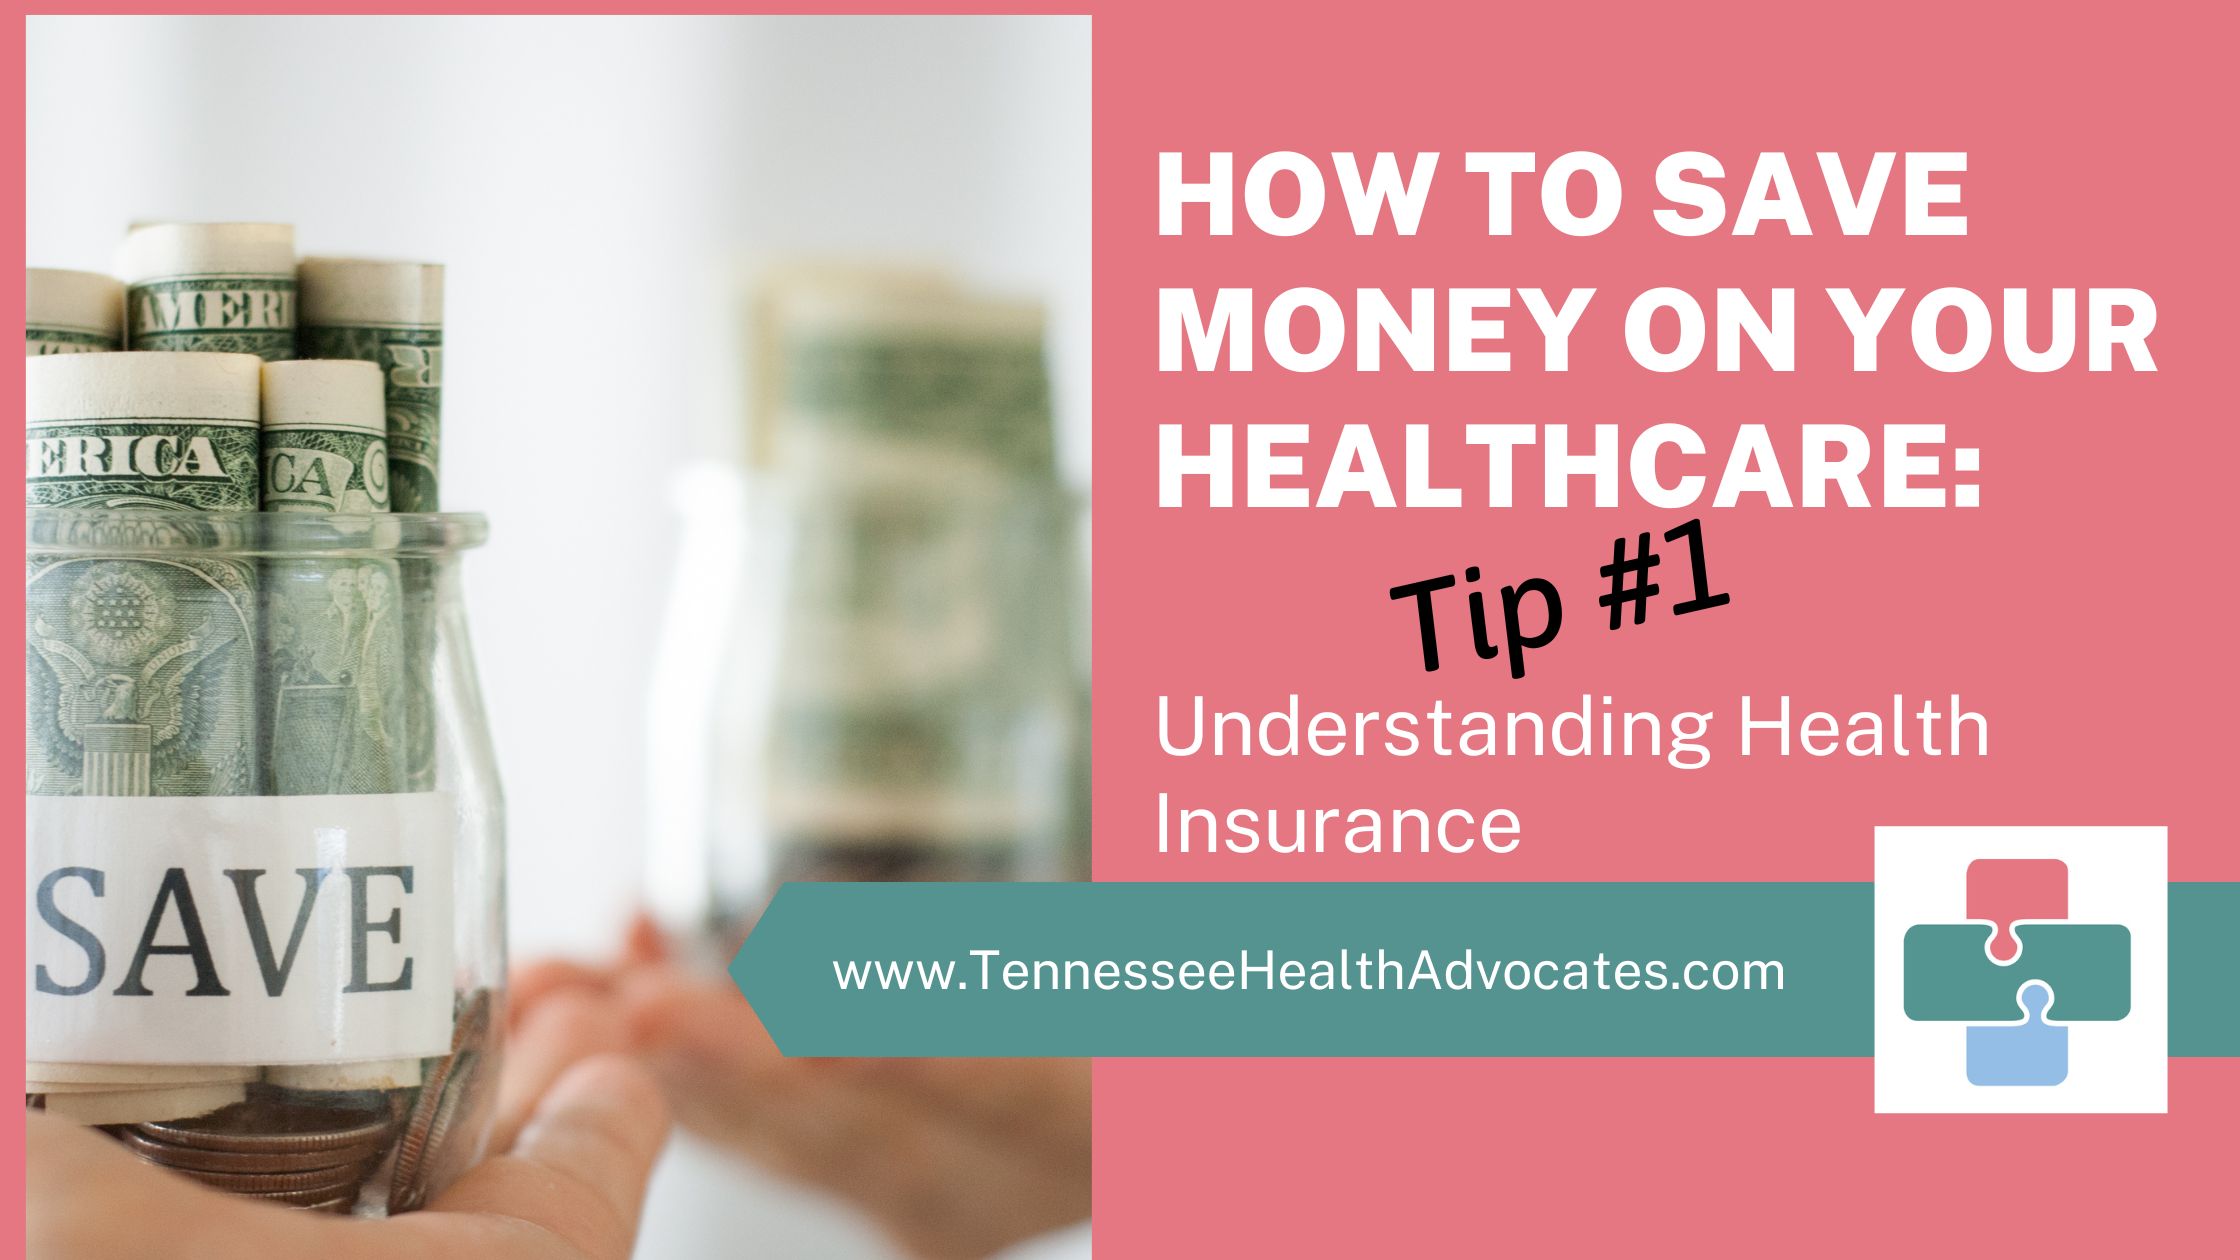 How to Save Money on Your Healthcare